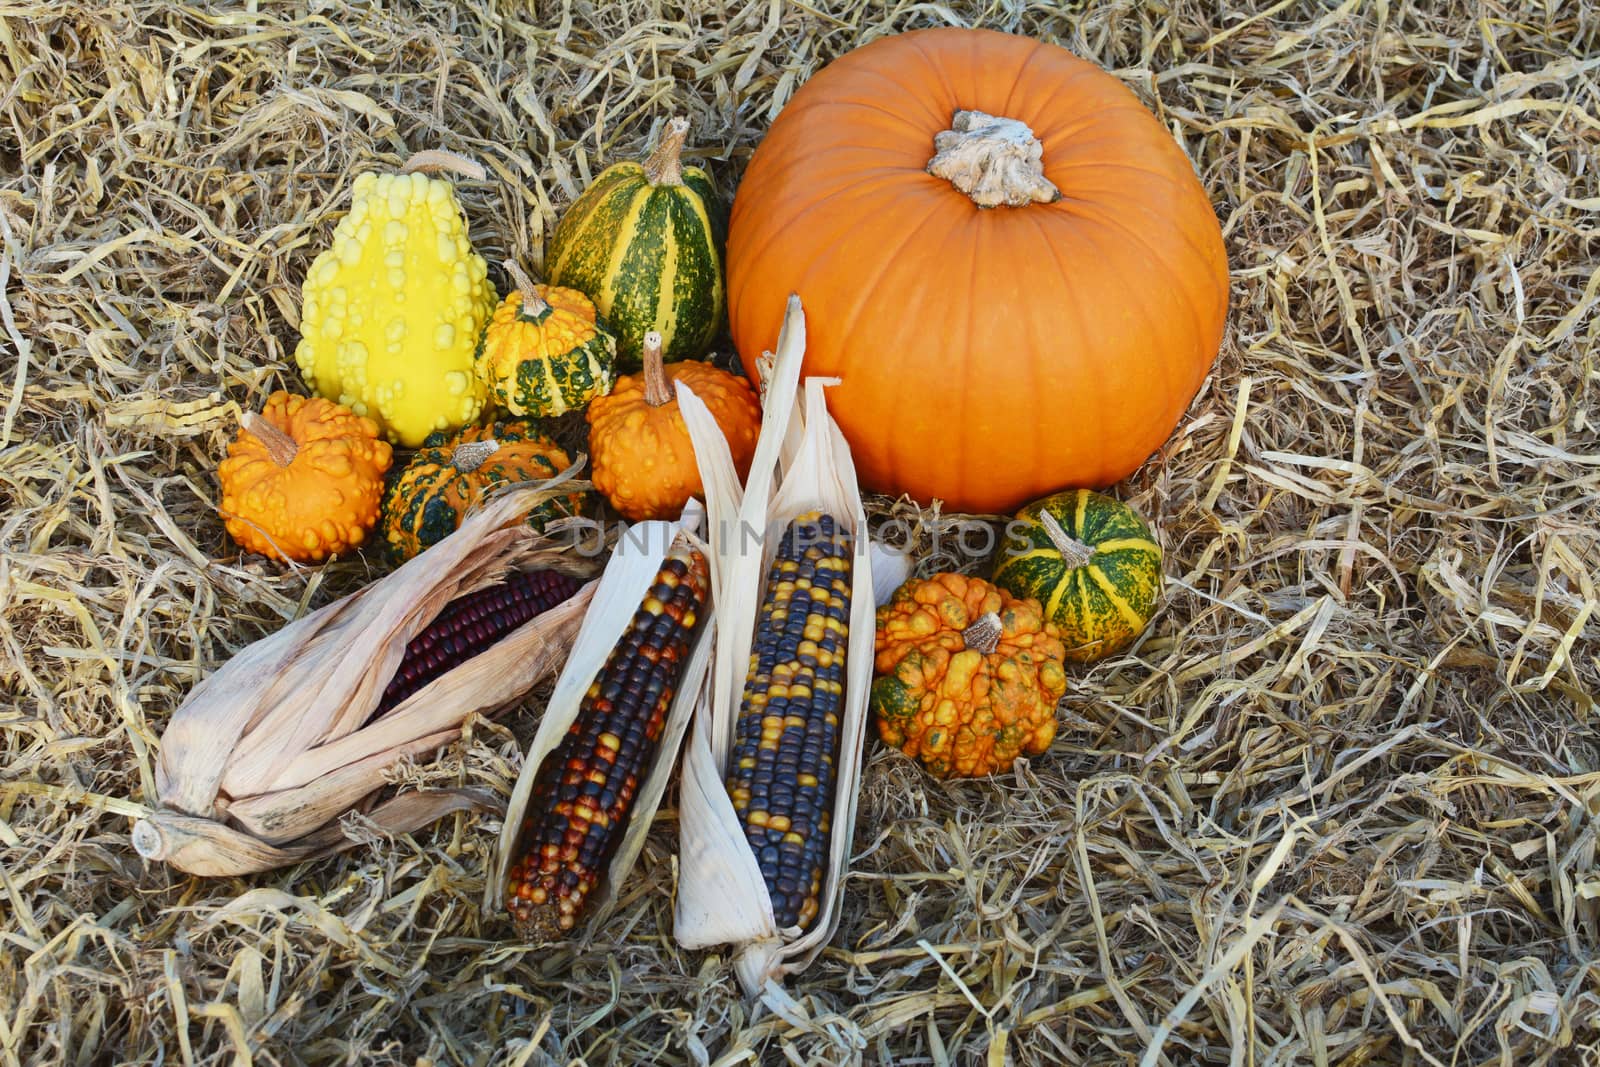 Ripe pumpkin surrounded by fall decorations of ornamental gourds and Indian corn on hay